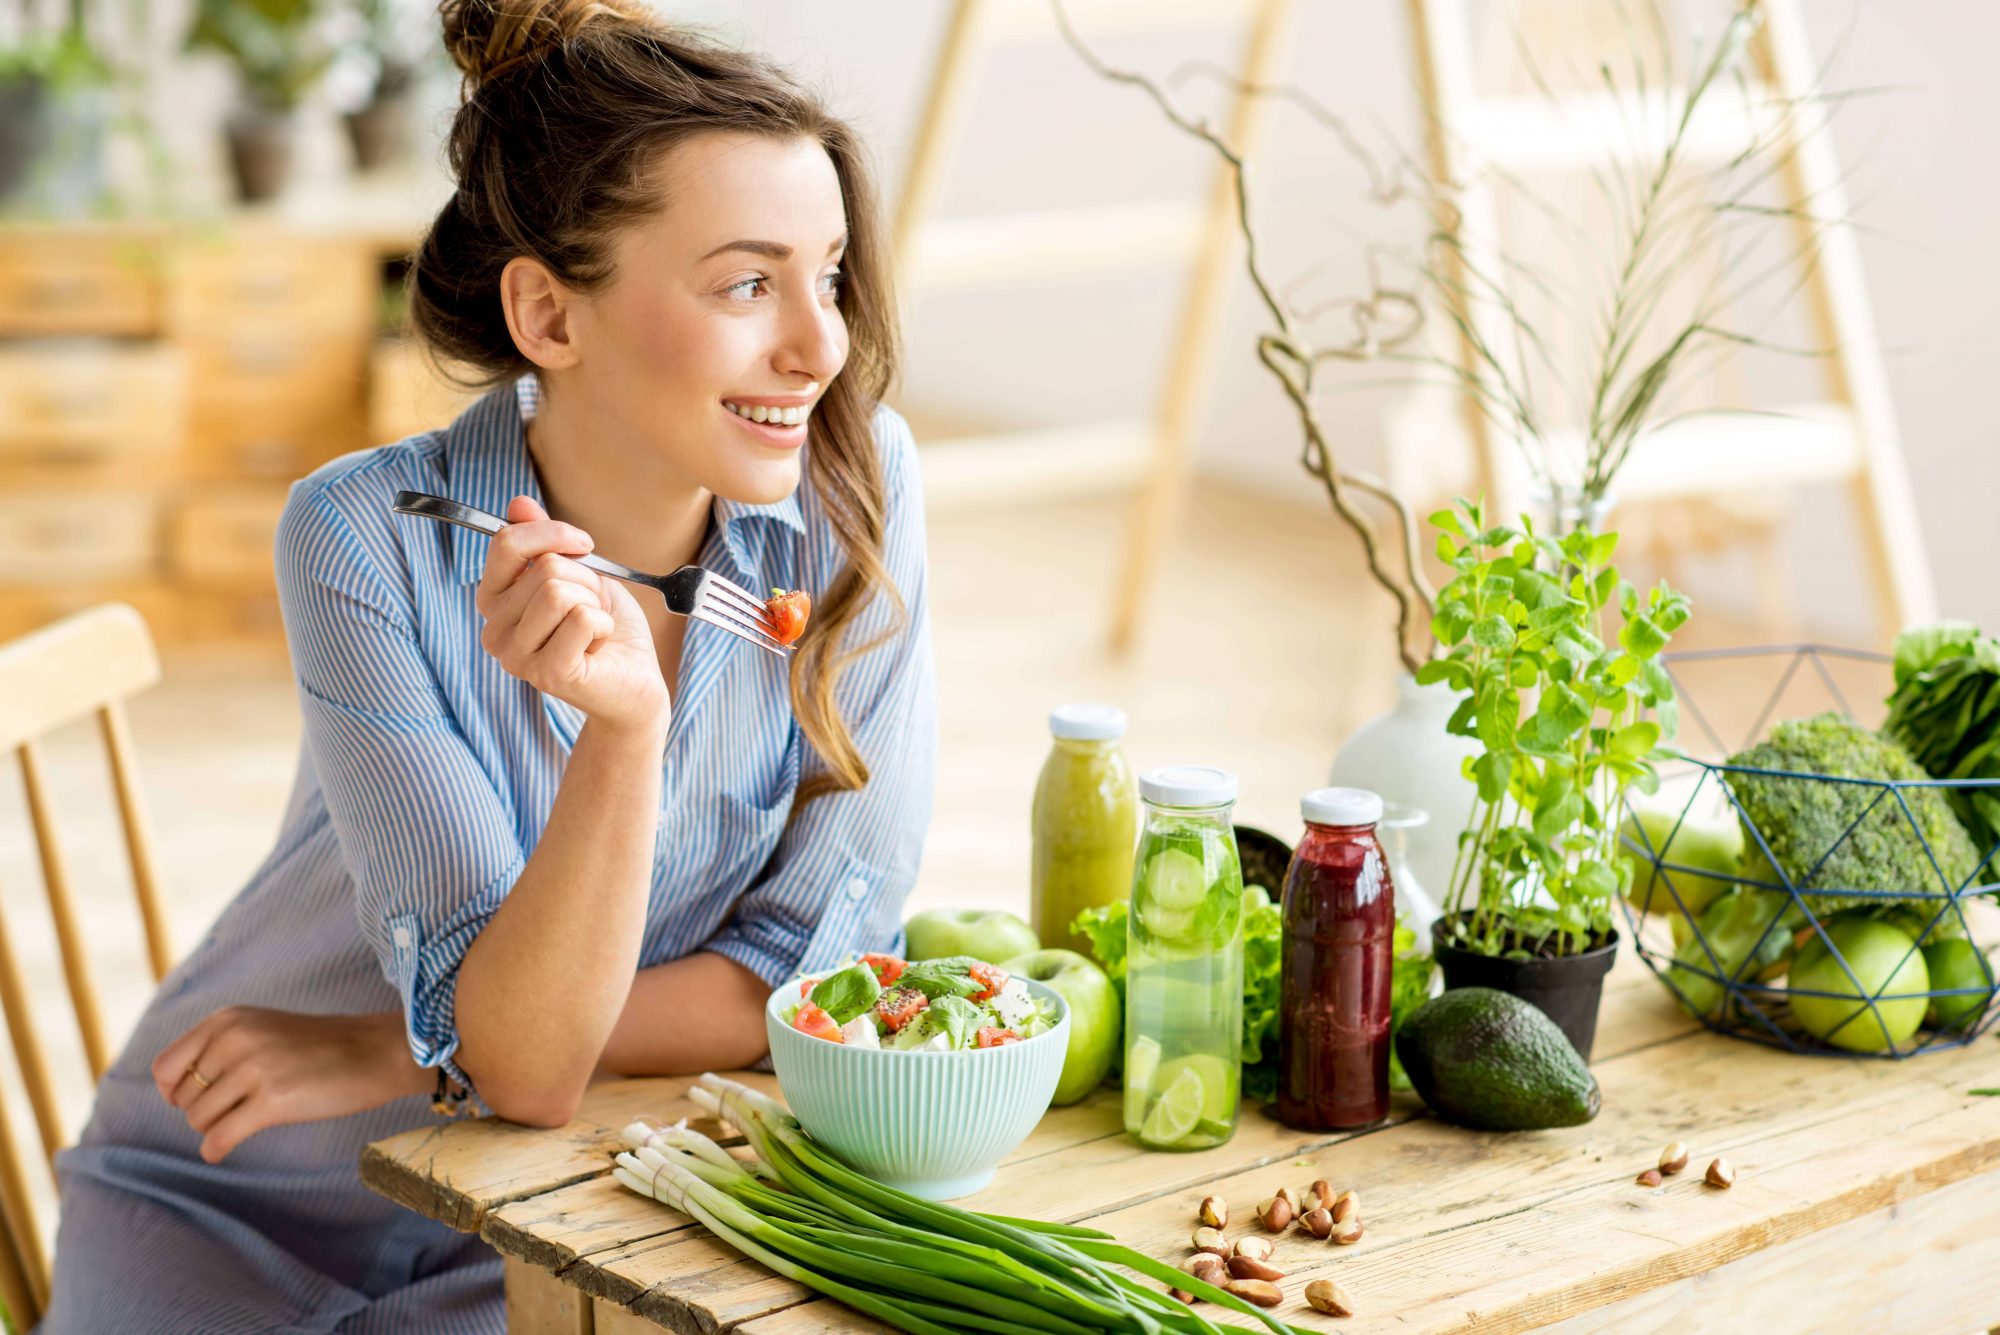 Woman Smiling while eating Vegetables